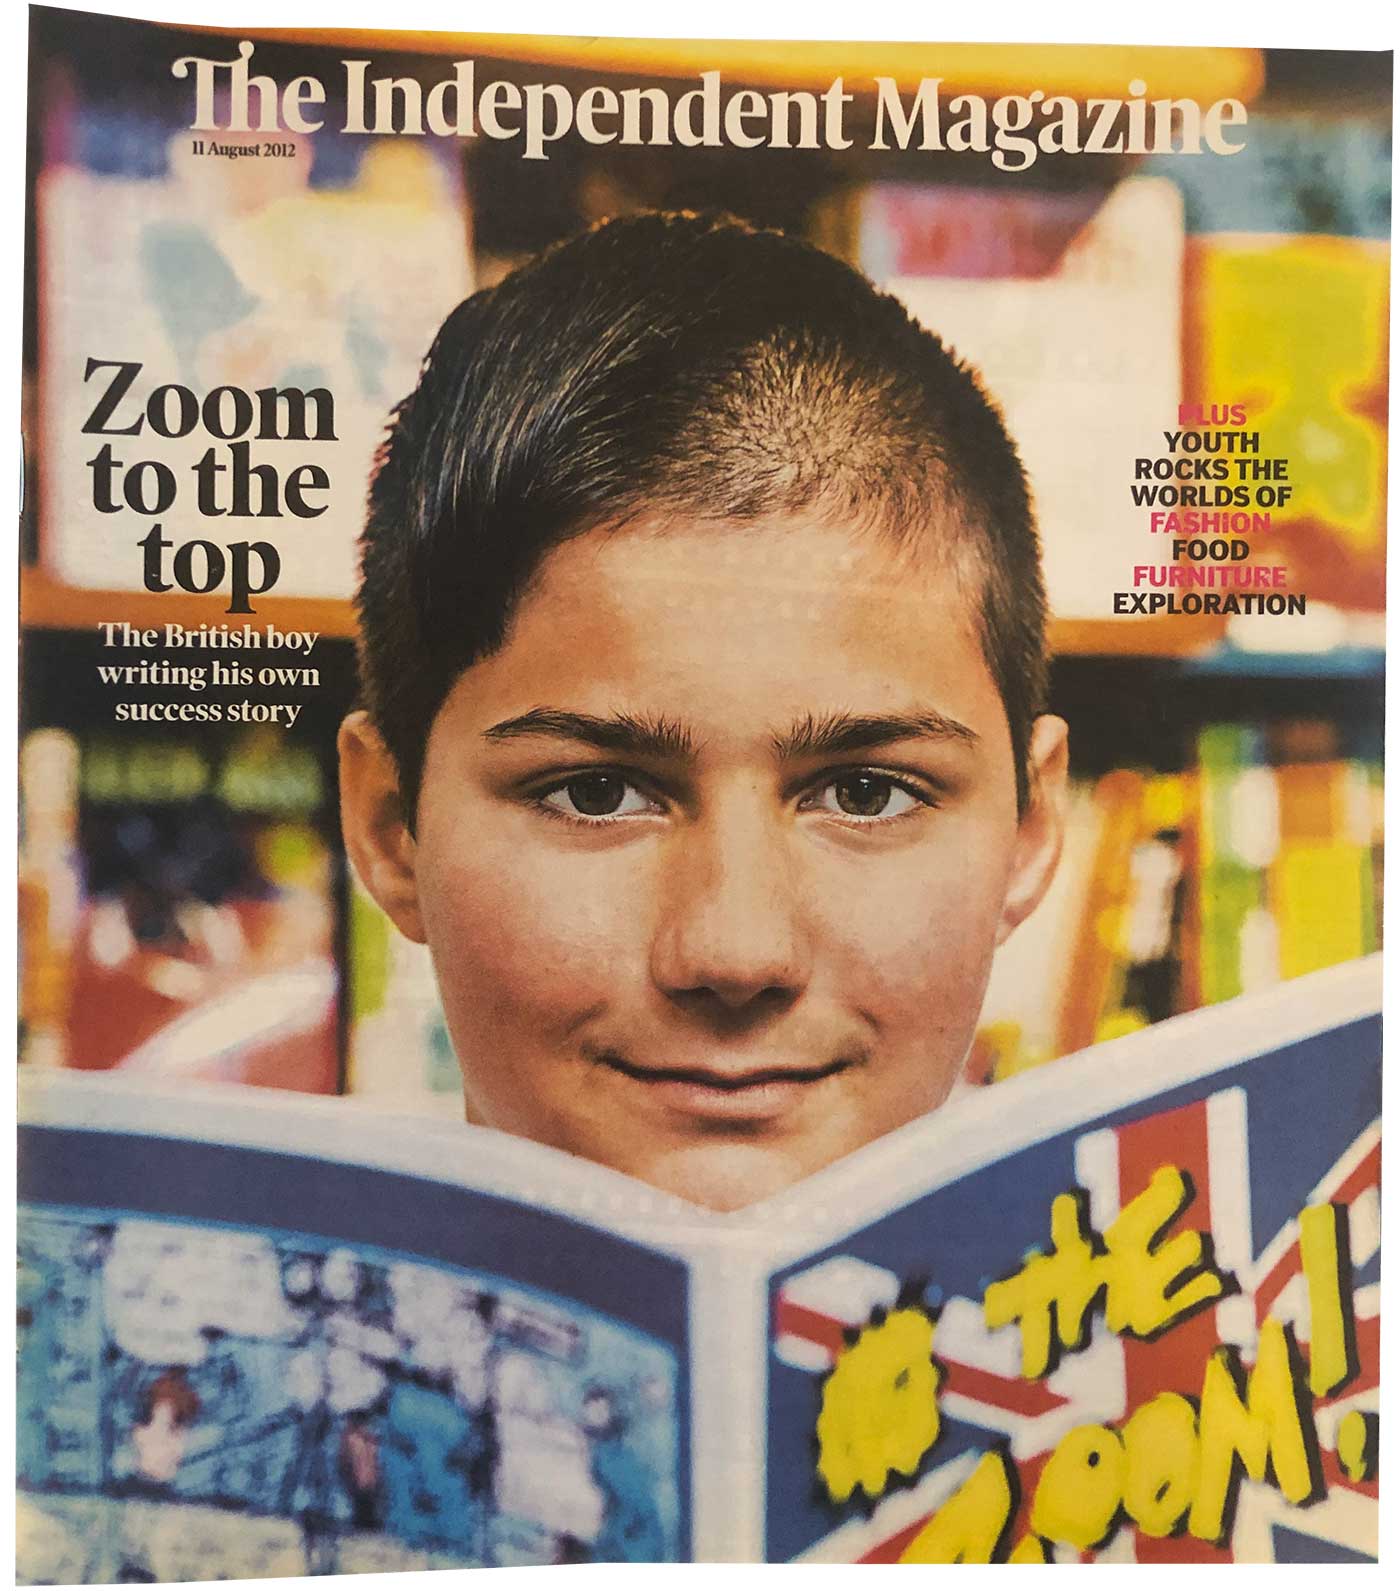 The Independent Magazine featuring Zoom Rockman